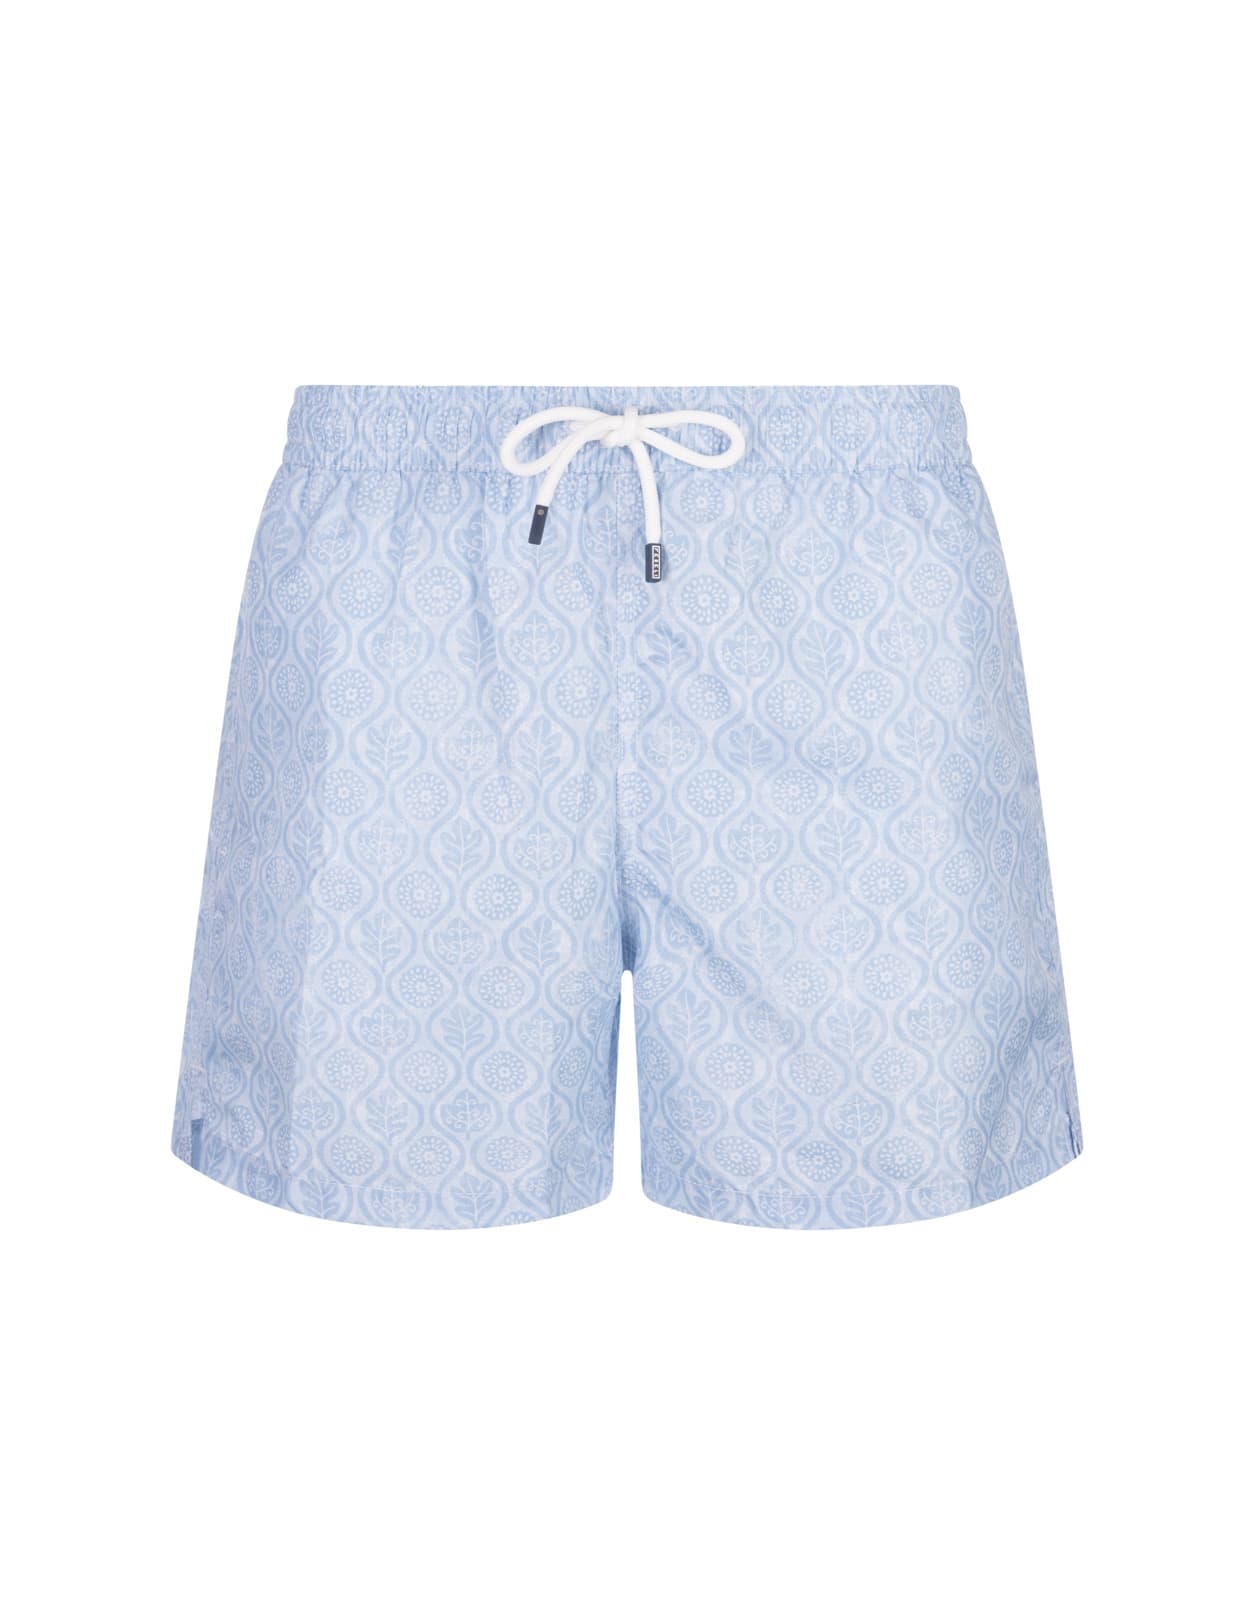 Light Blue Swim Shorts With Flower And Leaf Pattern